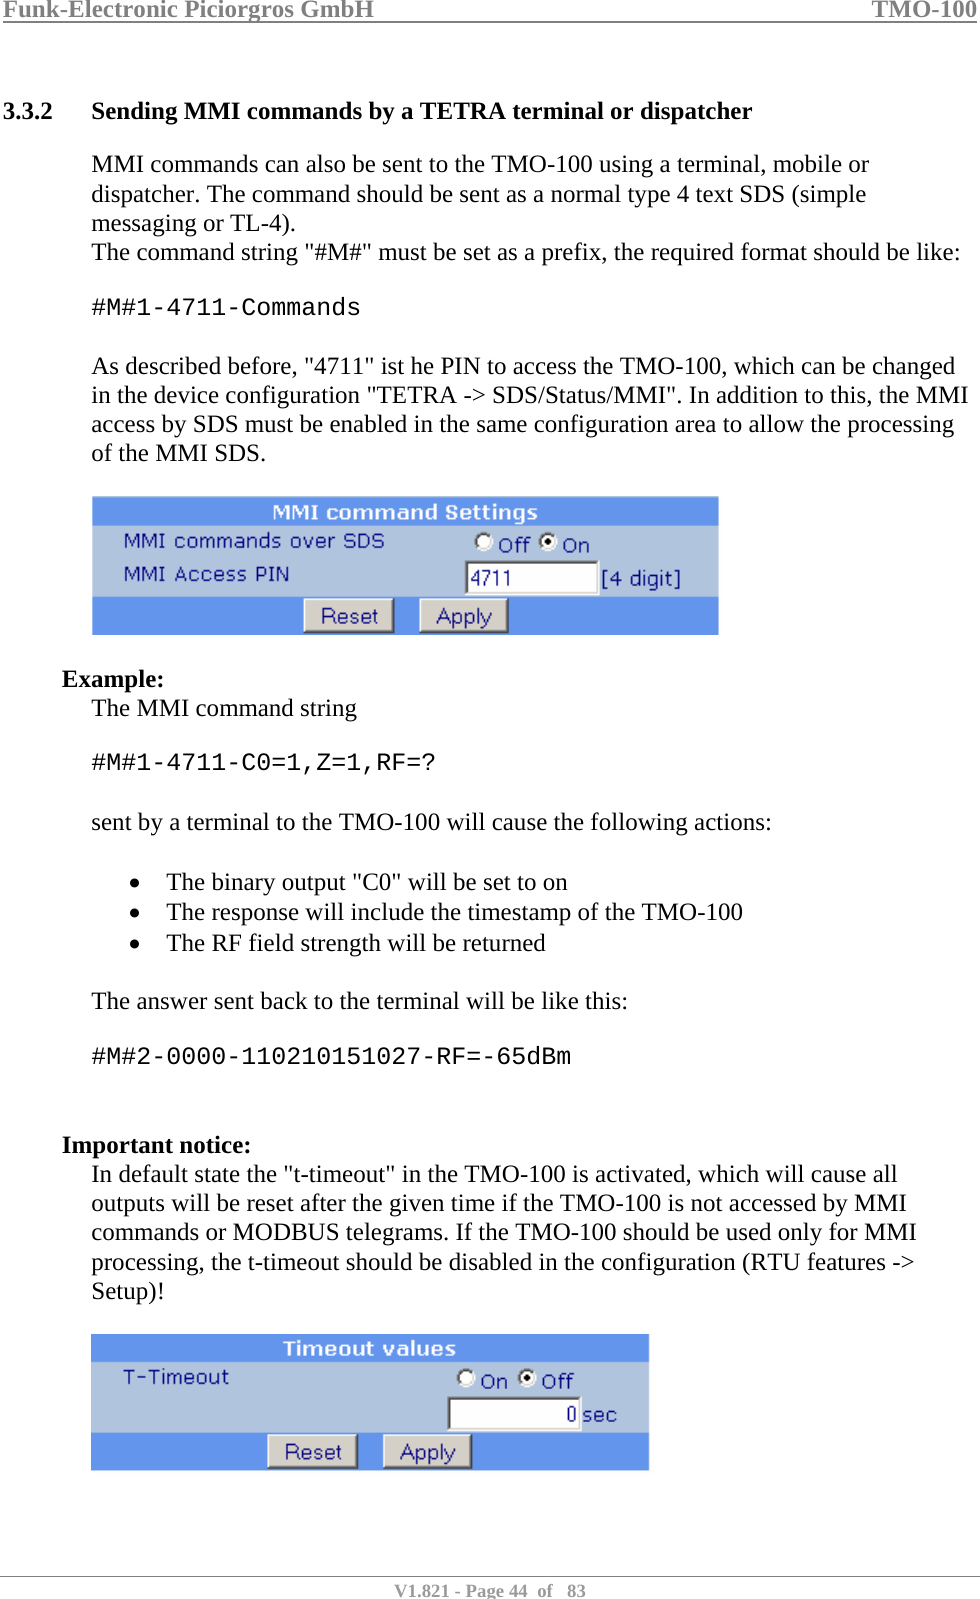 Funk-Electronic Piciorgros GmbH   TMO-100   V1.821 - Page 44  of   83   3.3.2 Sending MMI commands by a TETRA terminal or dispatcher MMI commands can also be sent to the TMO-100 using a terminal, mobile or dispatcher. The command should be sent as a normal type 4 text SDS (simple messaging or TL-4). The command string &quot;#M#&quot; must be set as a prefix, the required format should be like:  #M#1-4711-Commands  As described before, &quot;4711&quot; ist he PIN to access the TMO-100, which can be changed in the device configuration &quot;TETRA -&gt; SDS/Status/MMI&quot;. In addition to this, the MMI access by SDS must be enabled in the same configuration area to allow the processing of the MMI SDS.    Example: The MMI command string  #M#1-4711-C0=1,Z=1,RF=?  sent by a terminal to the TMO-100 will cause the following actions:   • The binary output &quot;C0&quot; will be set to on • The response will include the timestamp of the TMO-100 • The RF field strength will be returned  The answer sent back to the terminal will be like this:  #M#2-0000-110210151027-RF=-65dBm   Important notice: In default state the &quot;t-timeout&quot; in the TMO-100 is activated, which will cause all outputs will be reset after the given time if the TMO-100 is not accessed by MMI commands or MODBUS telegrams. If the TMO-100 should be used only for MMI processing, the t-timeout should be disabled in the configuration (RTU features -&gt; Setup)!   